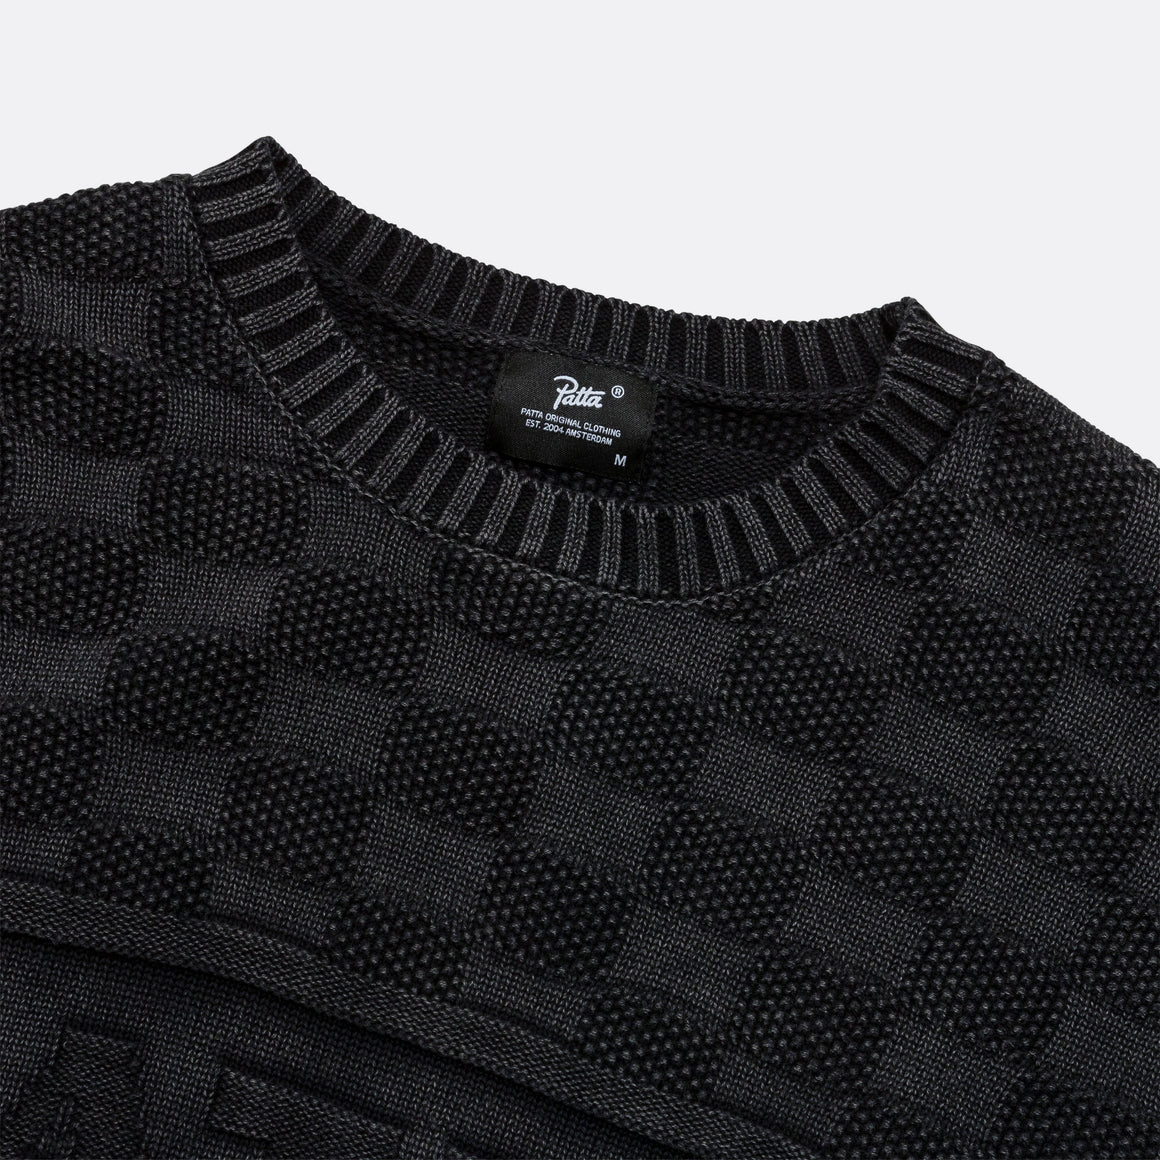 Patta - Purl Ribbed Knitted Sweater - Pirate Black - UP THERE